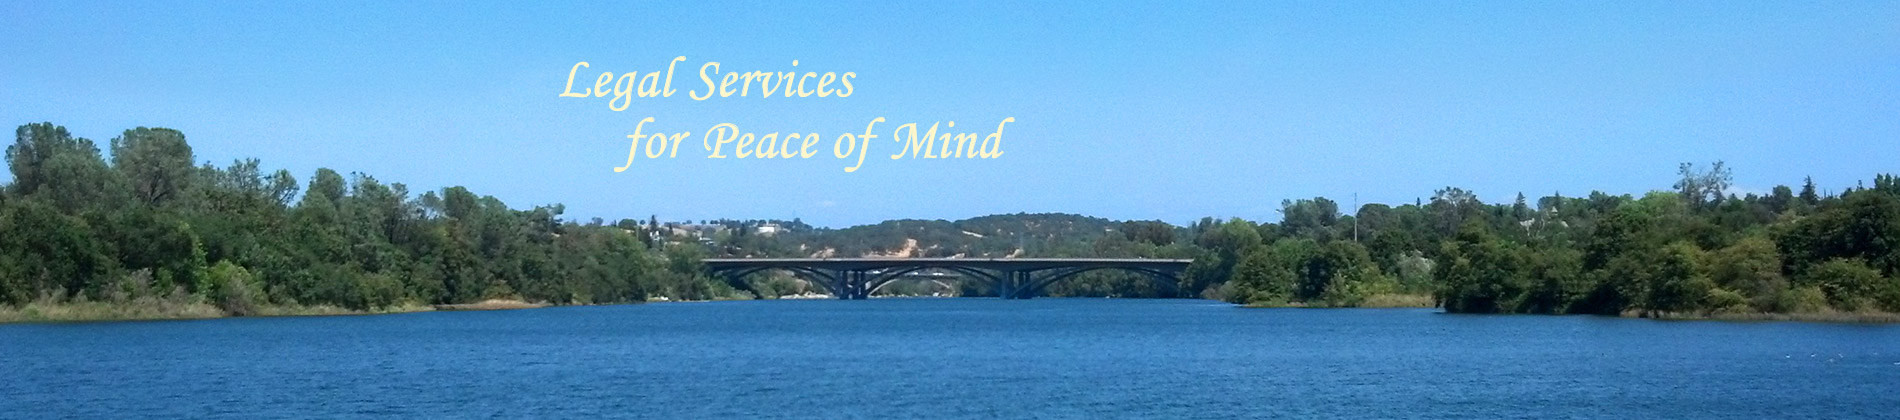 Law Offices of Jerilyn Paik - Legal Services for Peace of Mind